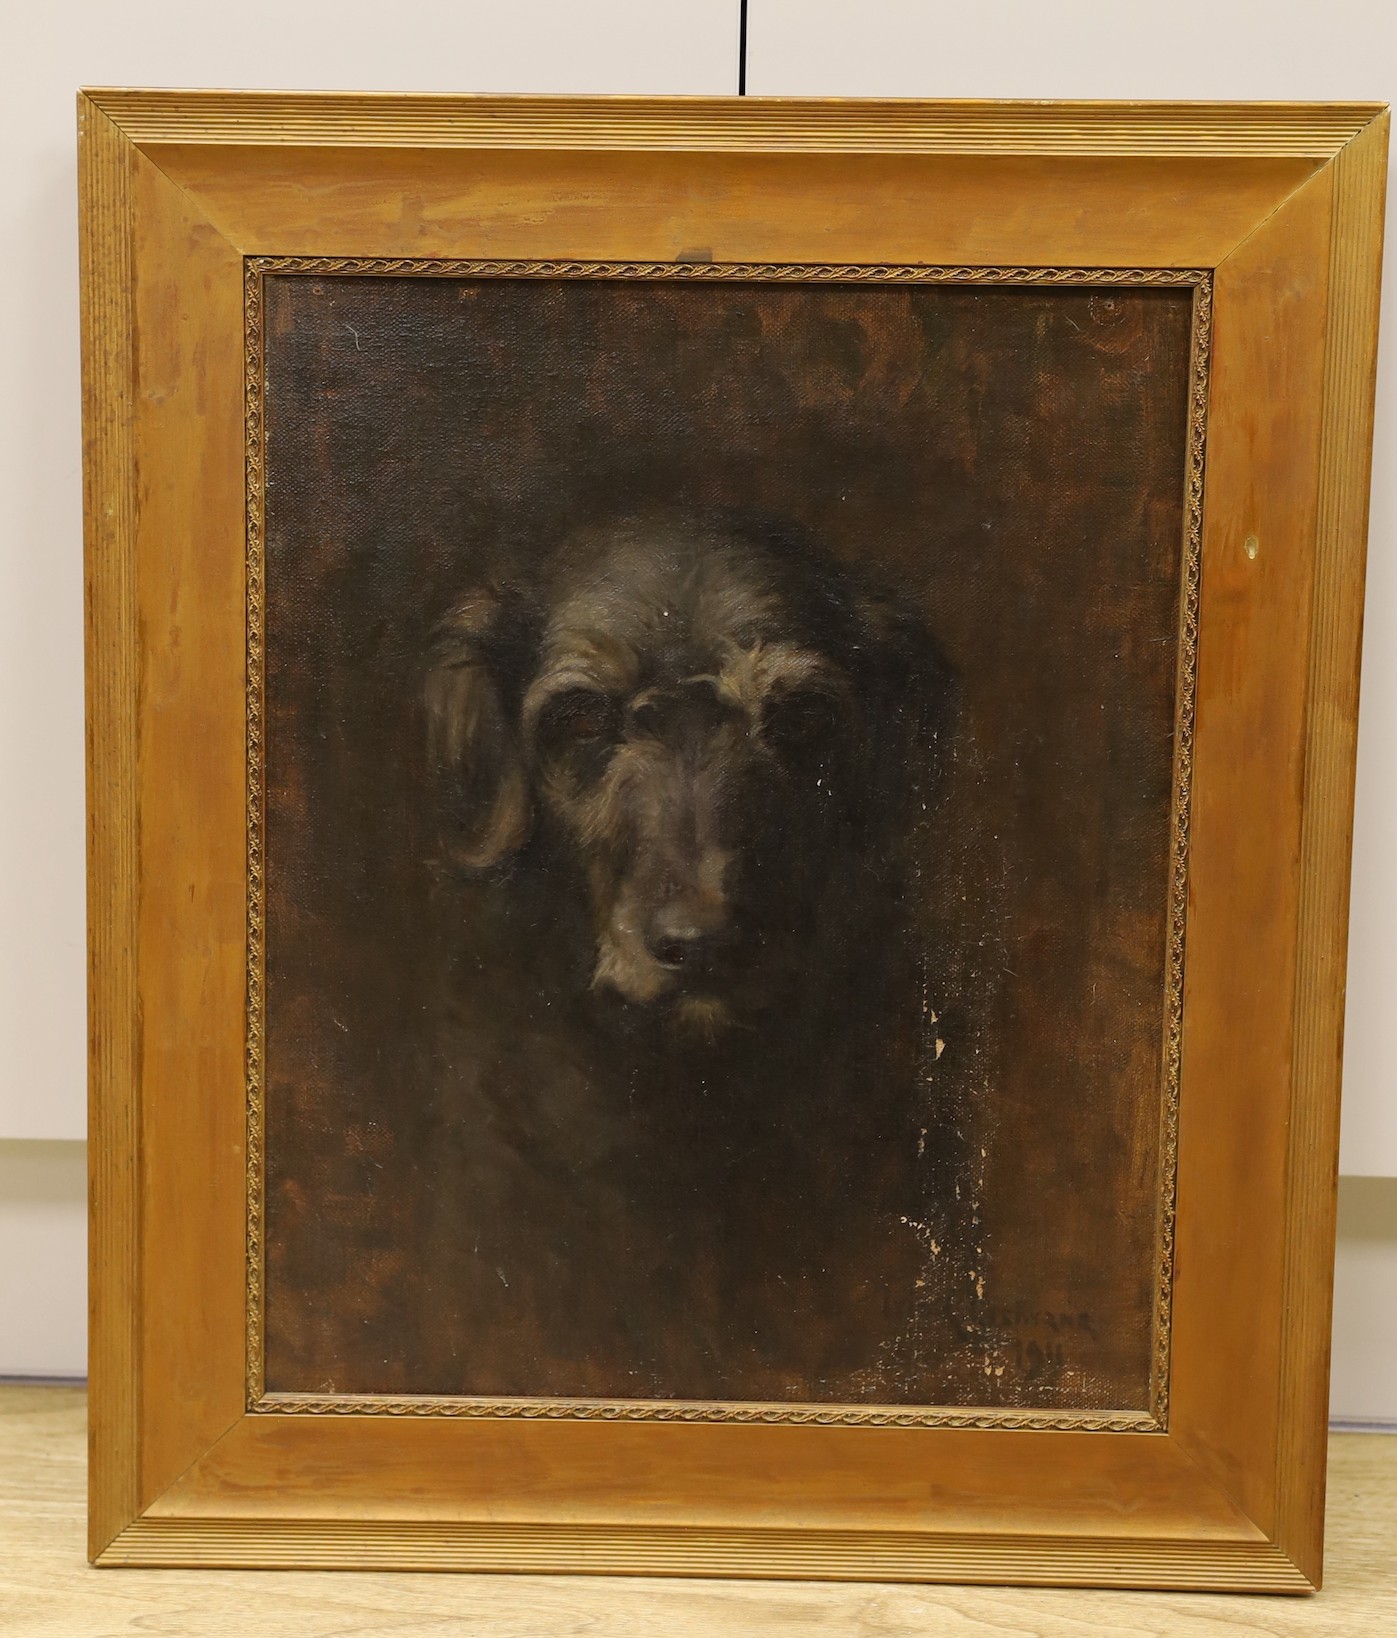 T. Cochrane, oil on canvas, Portrait of an black dog, signed and dated 1911, 50 x 40cm